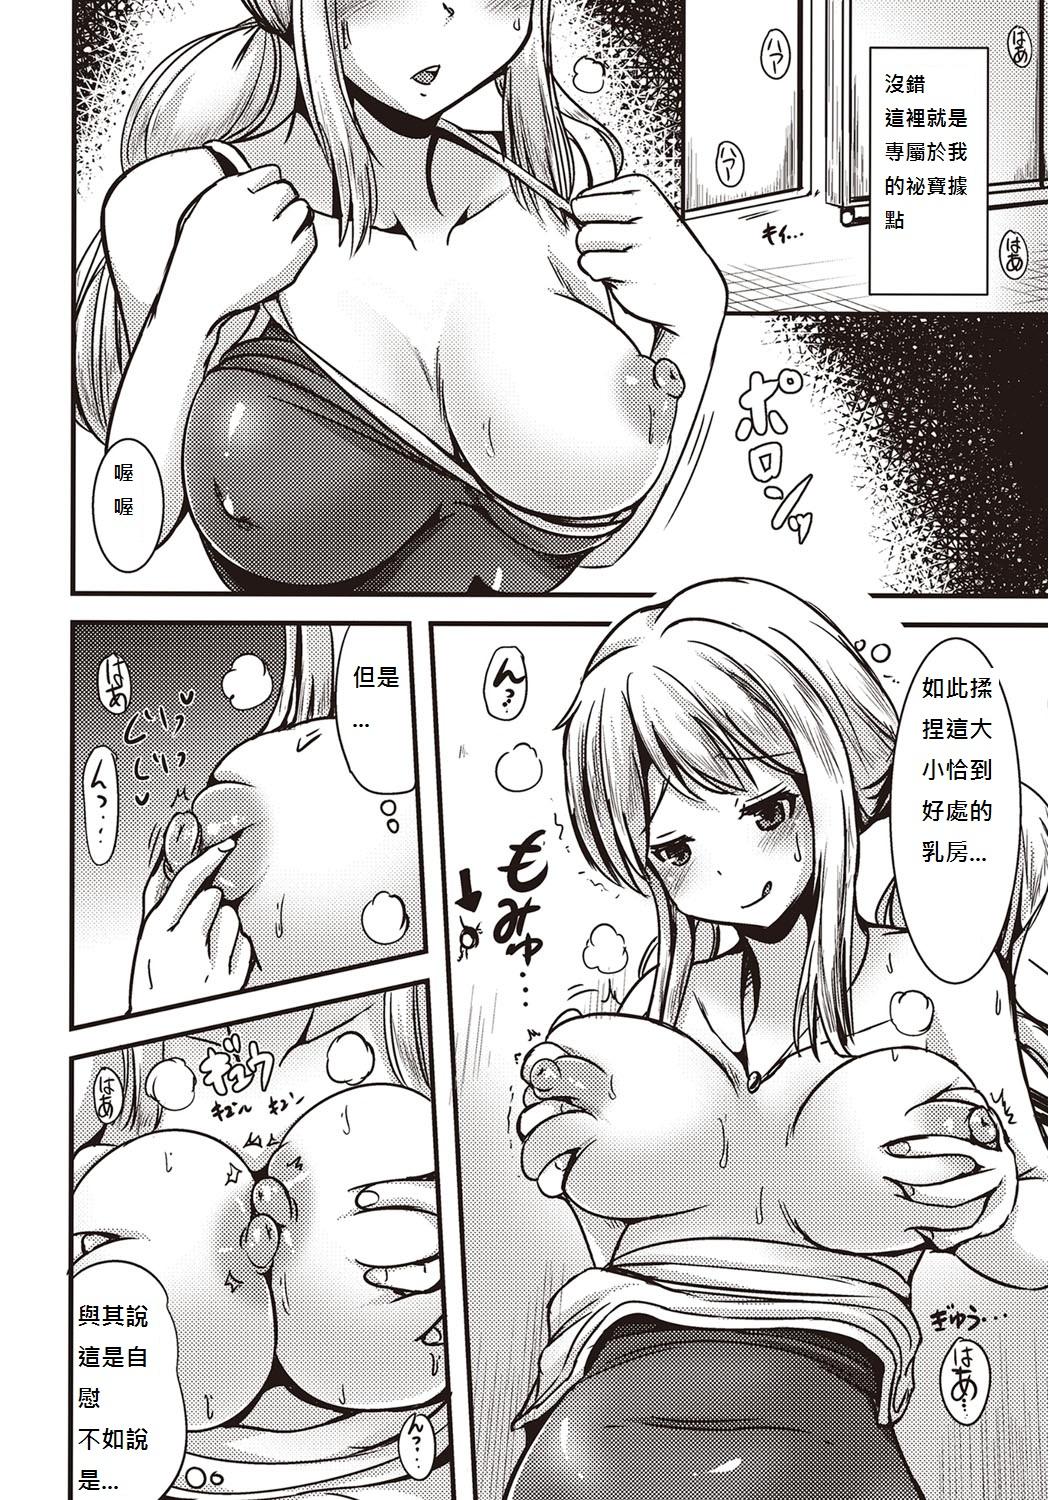 Sola Chishoujo Suit Gilf - Page 4